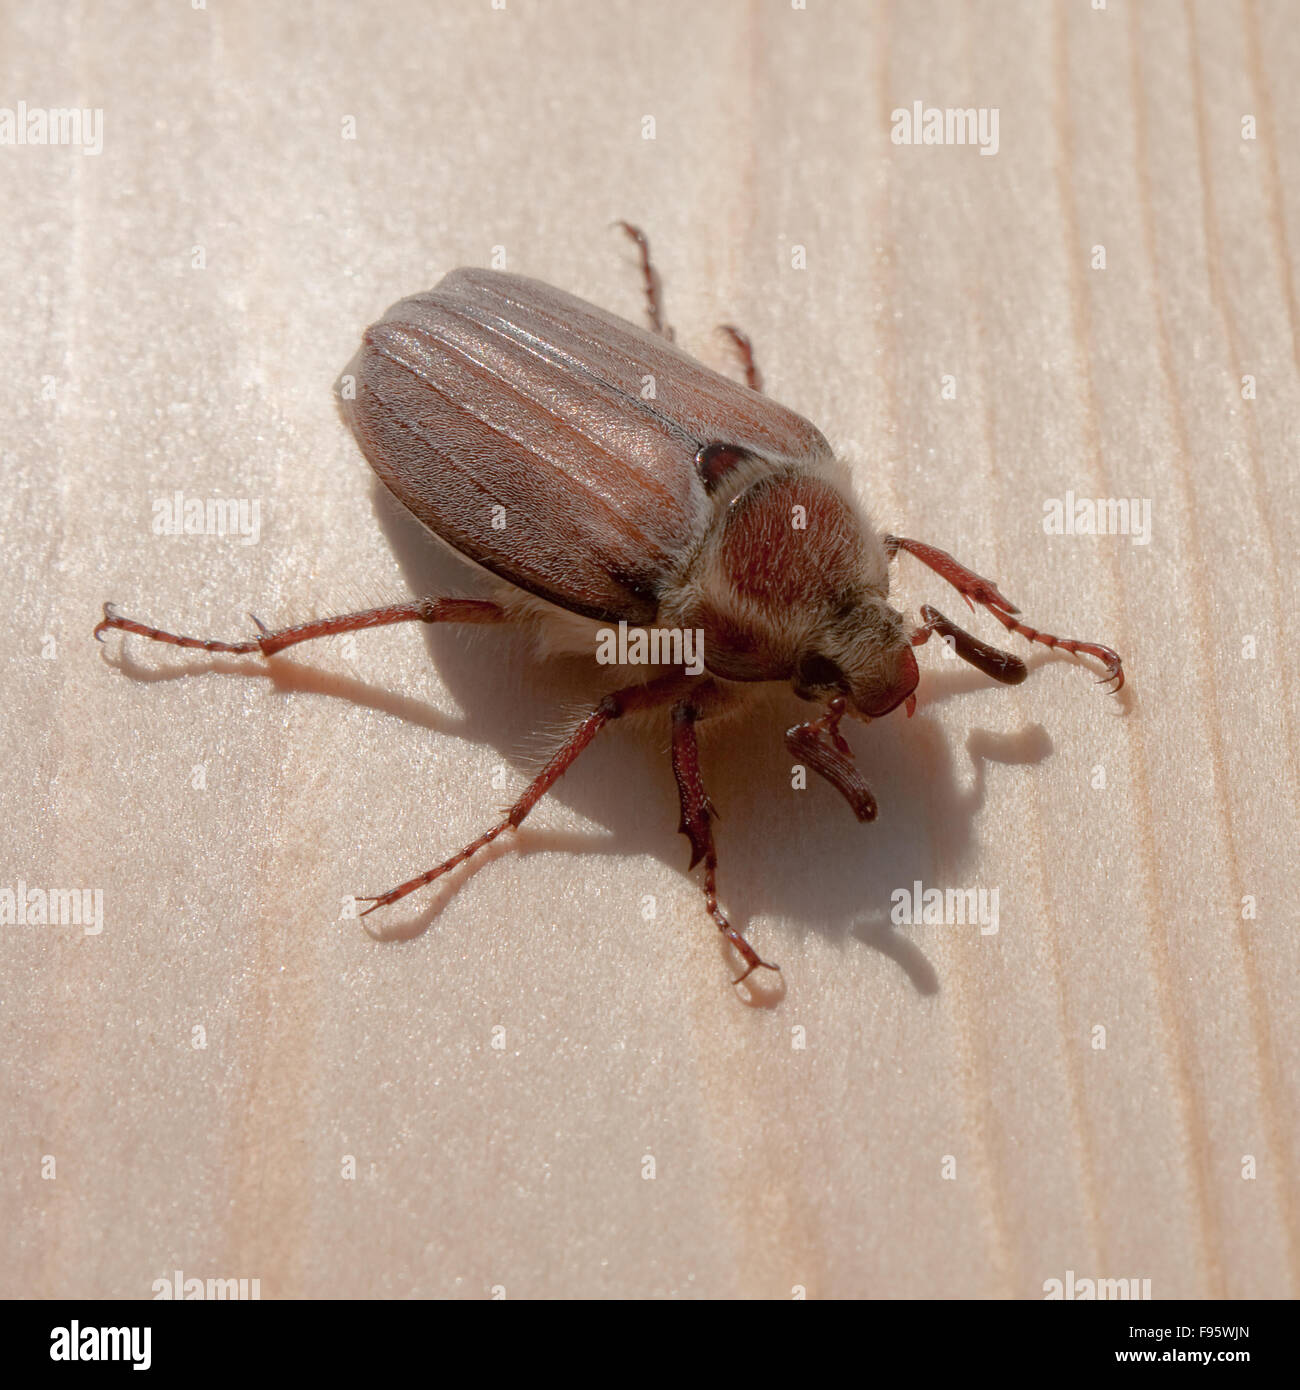 Cockchafer on the Wood Stock Photo